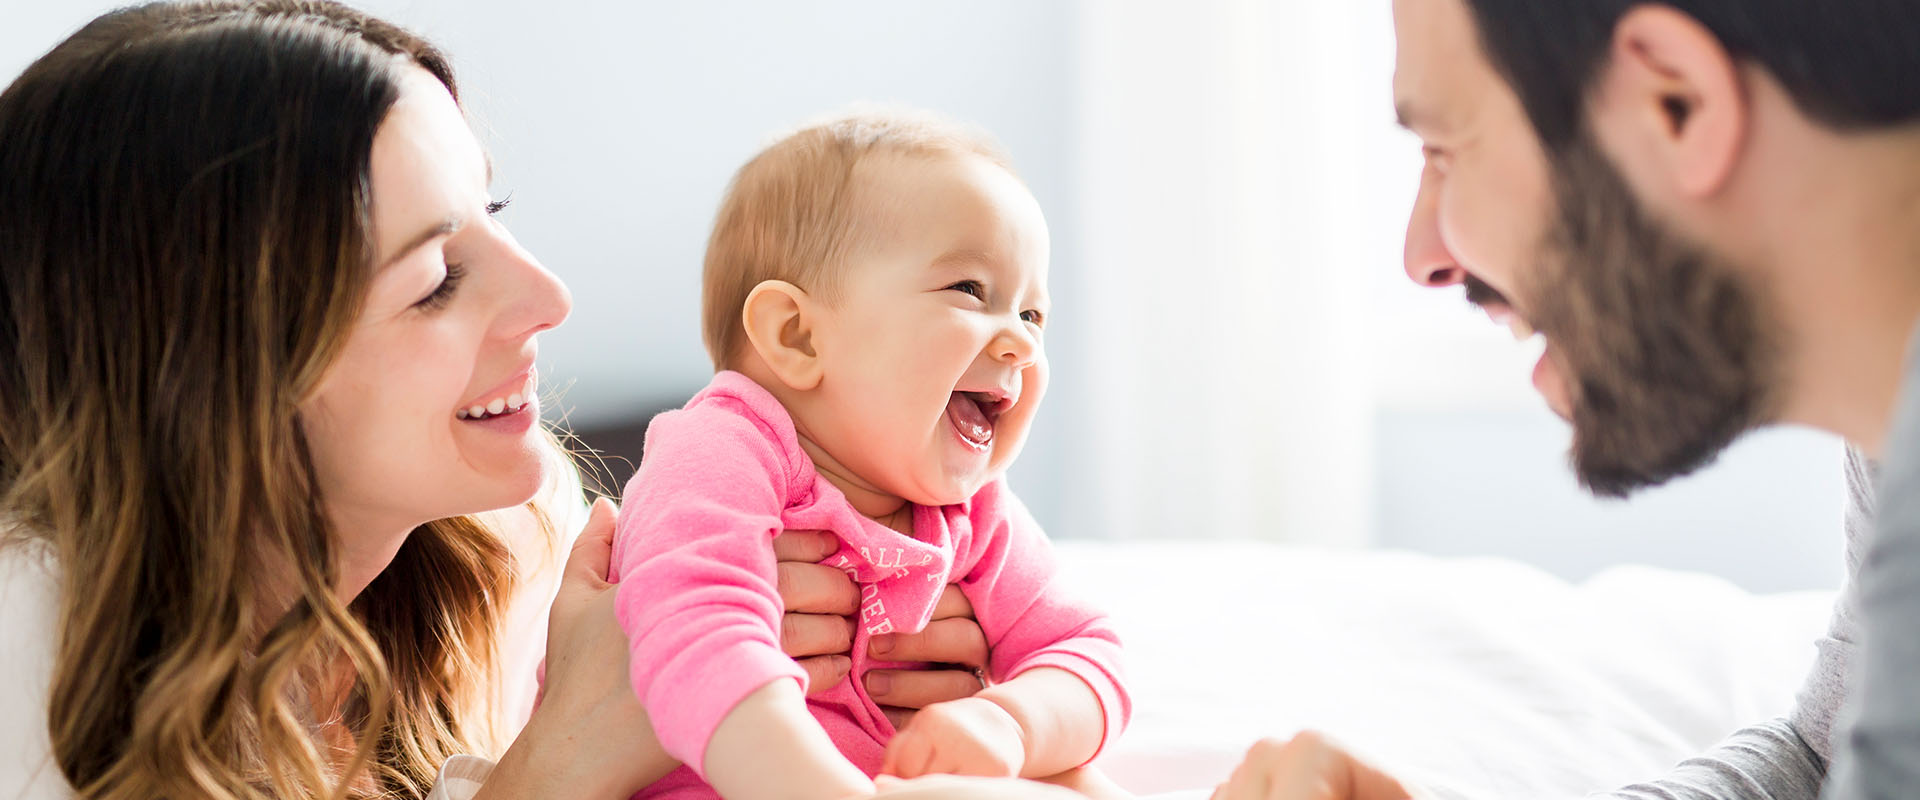 10 Things You’ll Do as a New Parent That Are More Important Than You Think